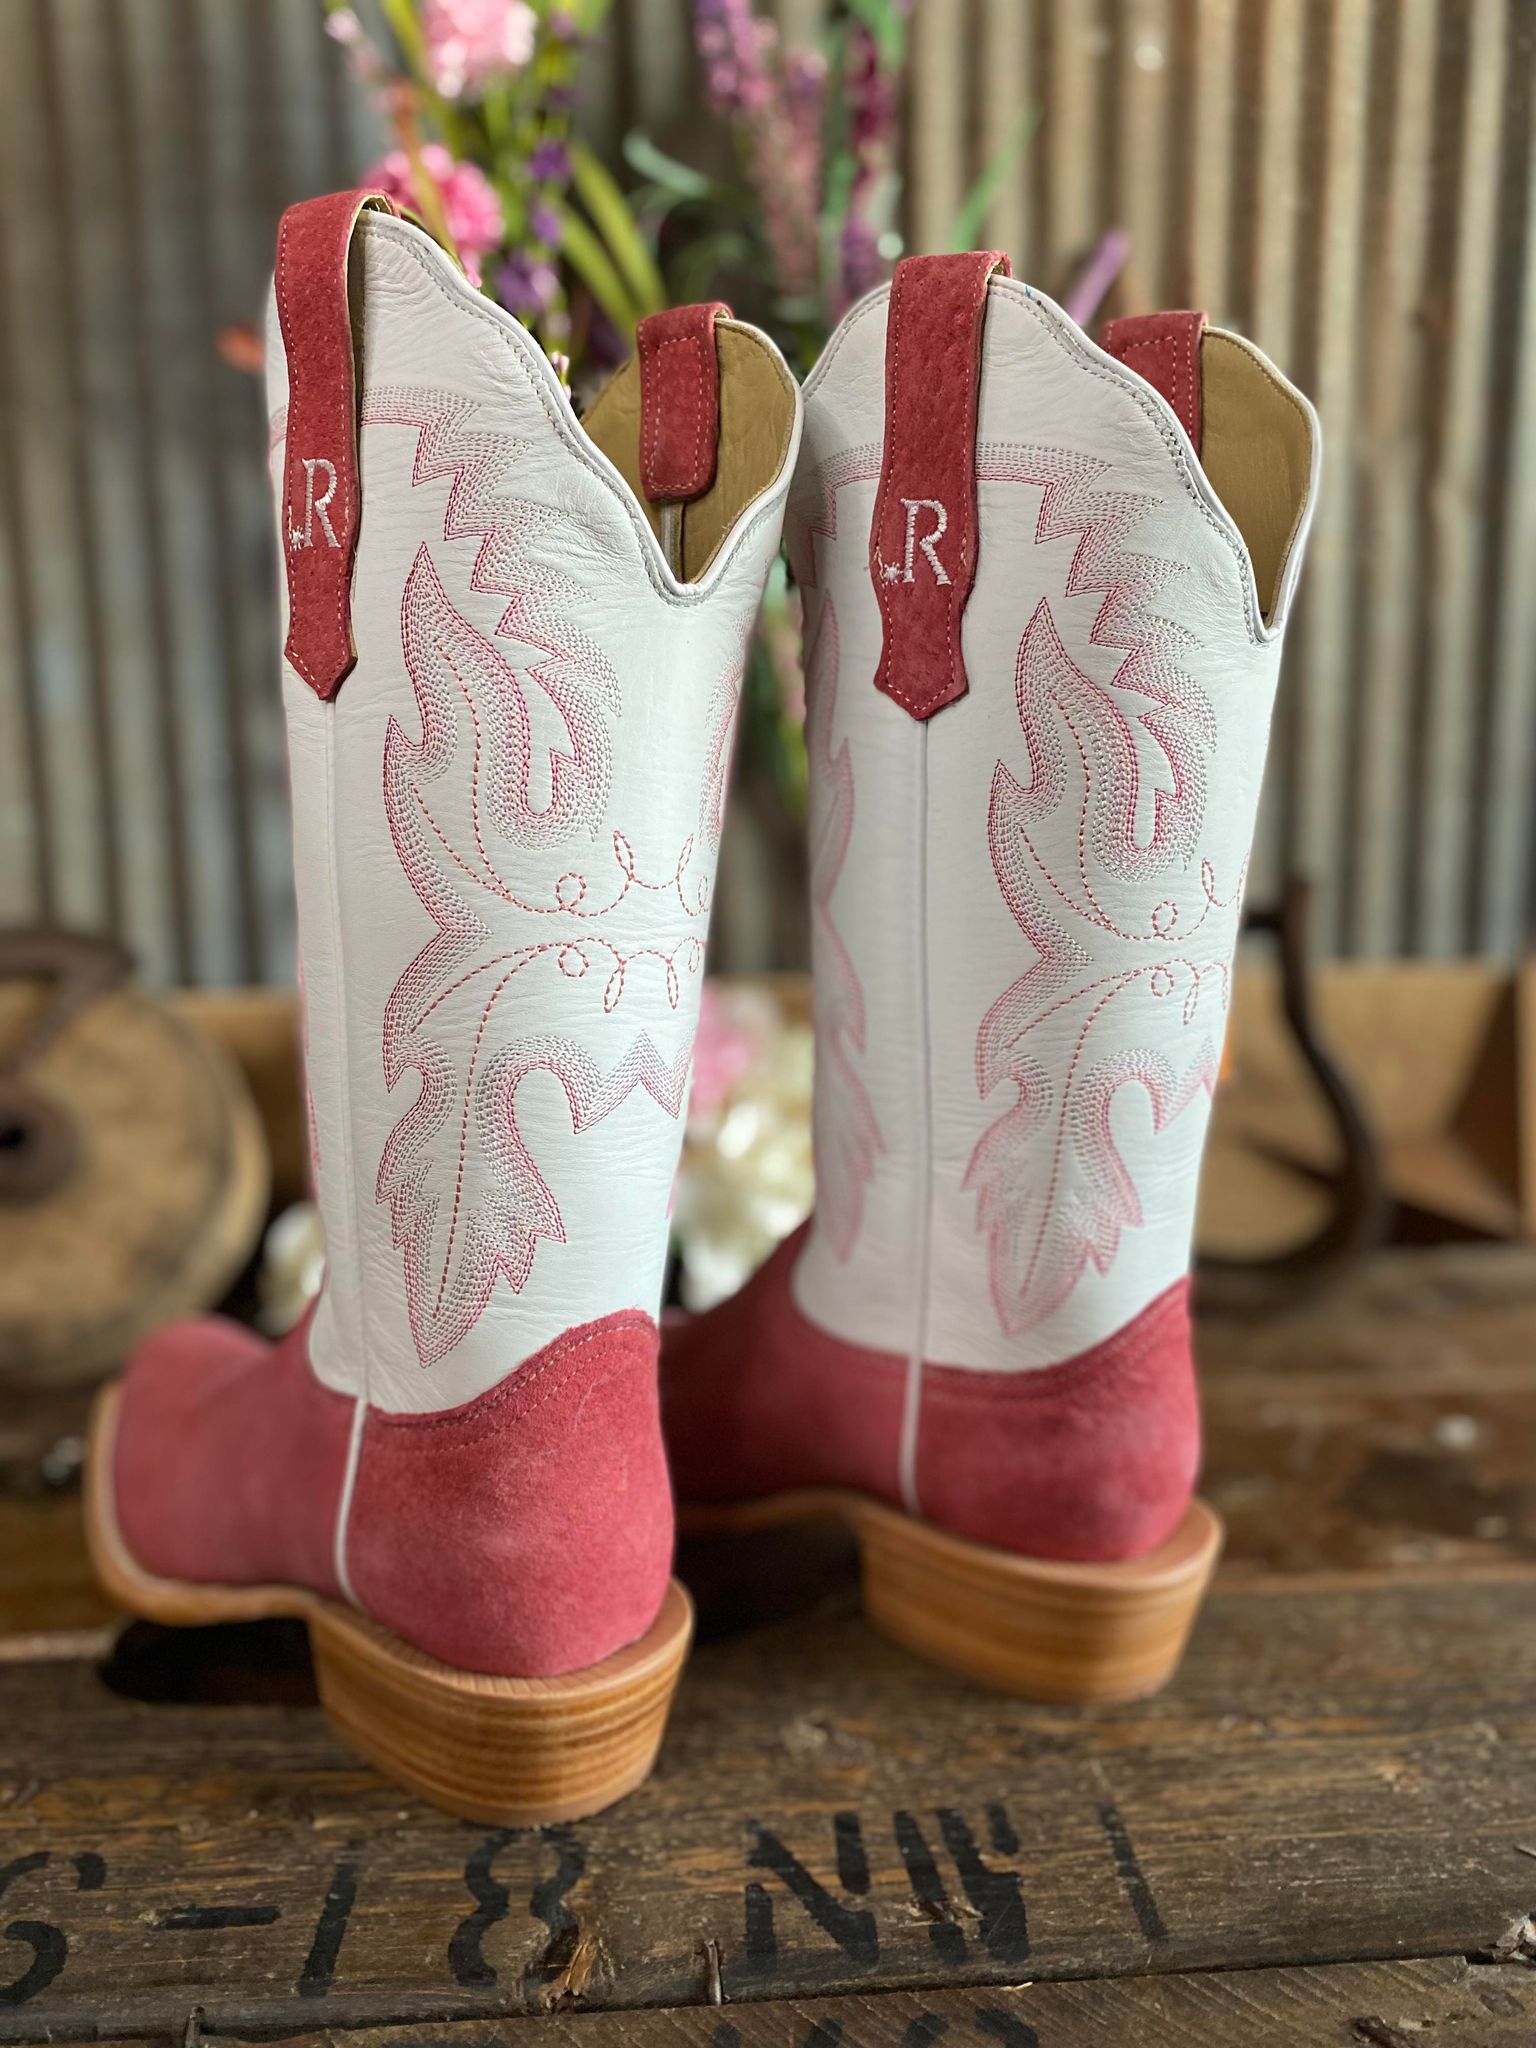 Women's R Watson Rose Roughout & Winter White-Women's Boots-R. Watson-Lucky J Boots & More, Women's, Men's, & Kids Western Store Located in Carthage, MO